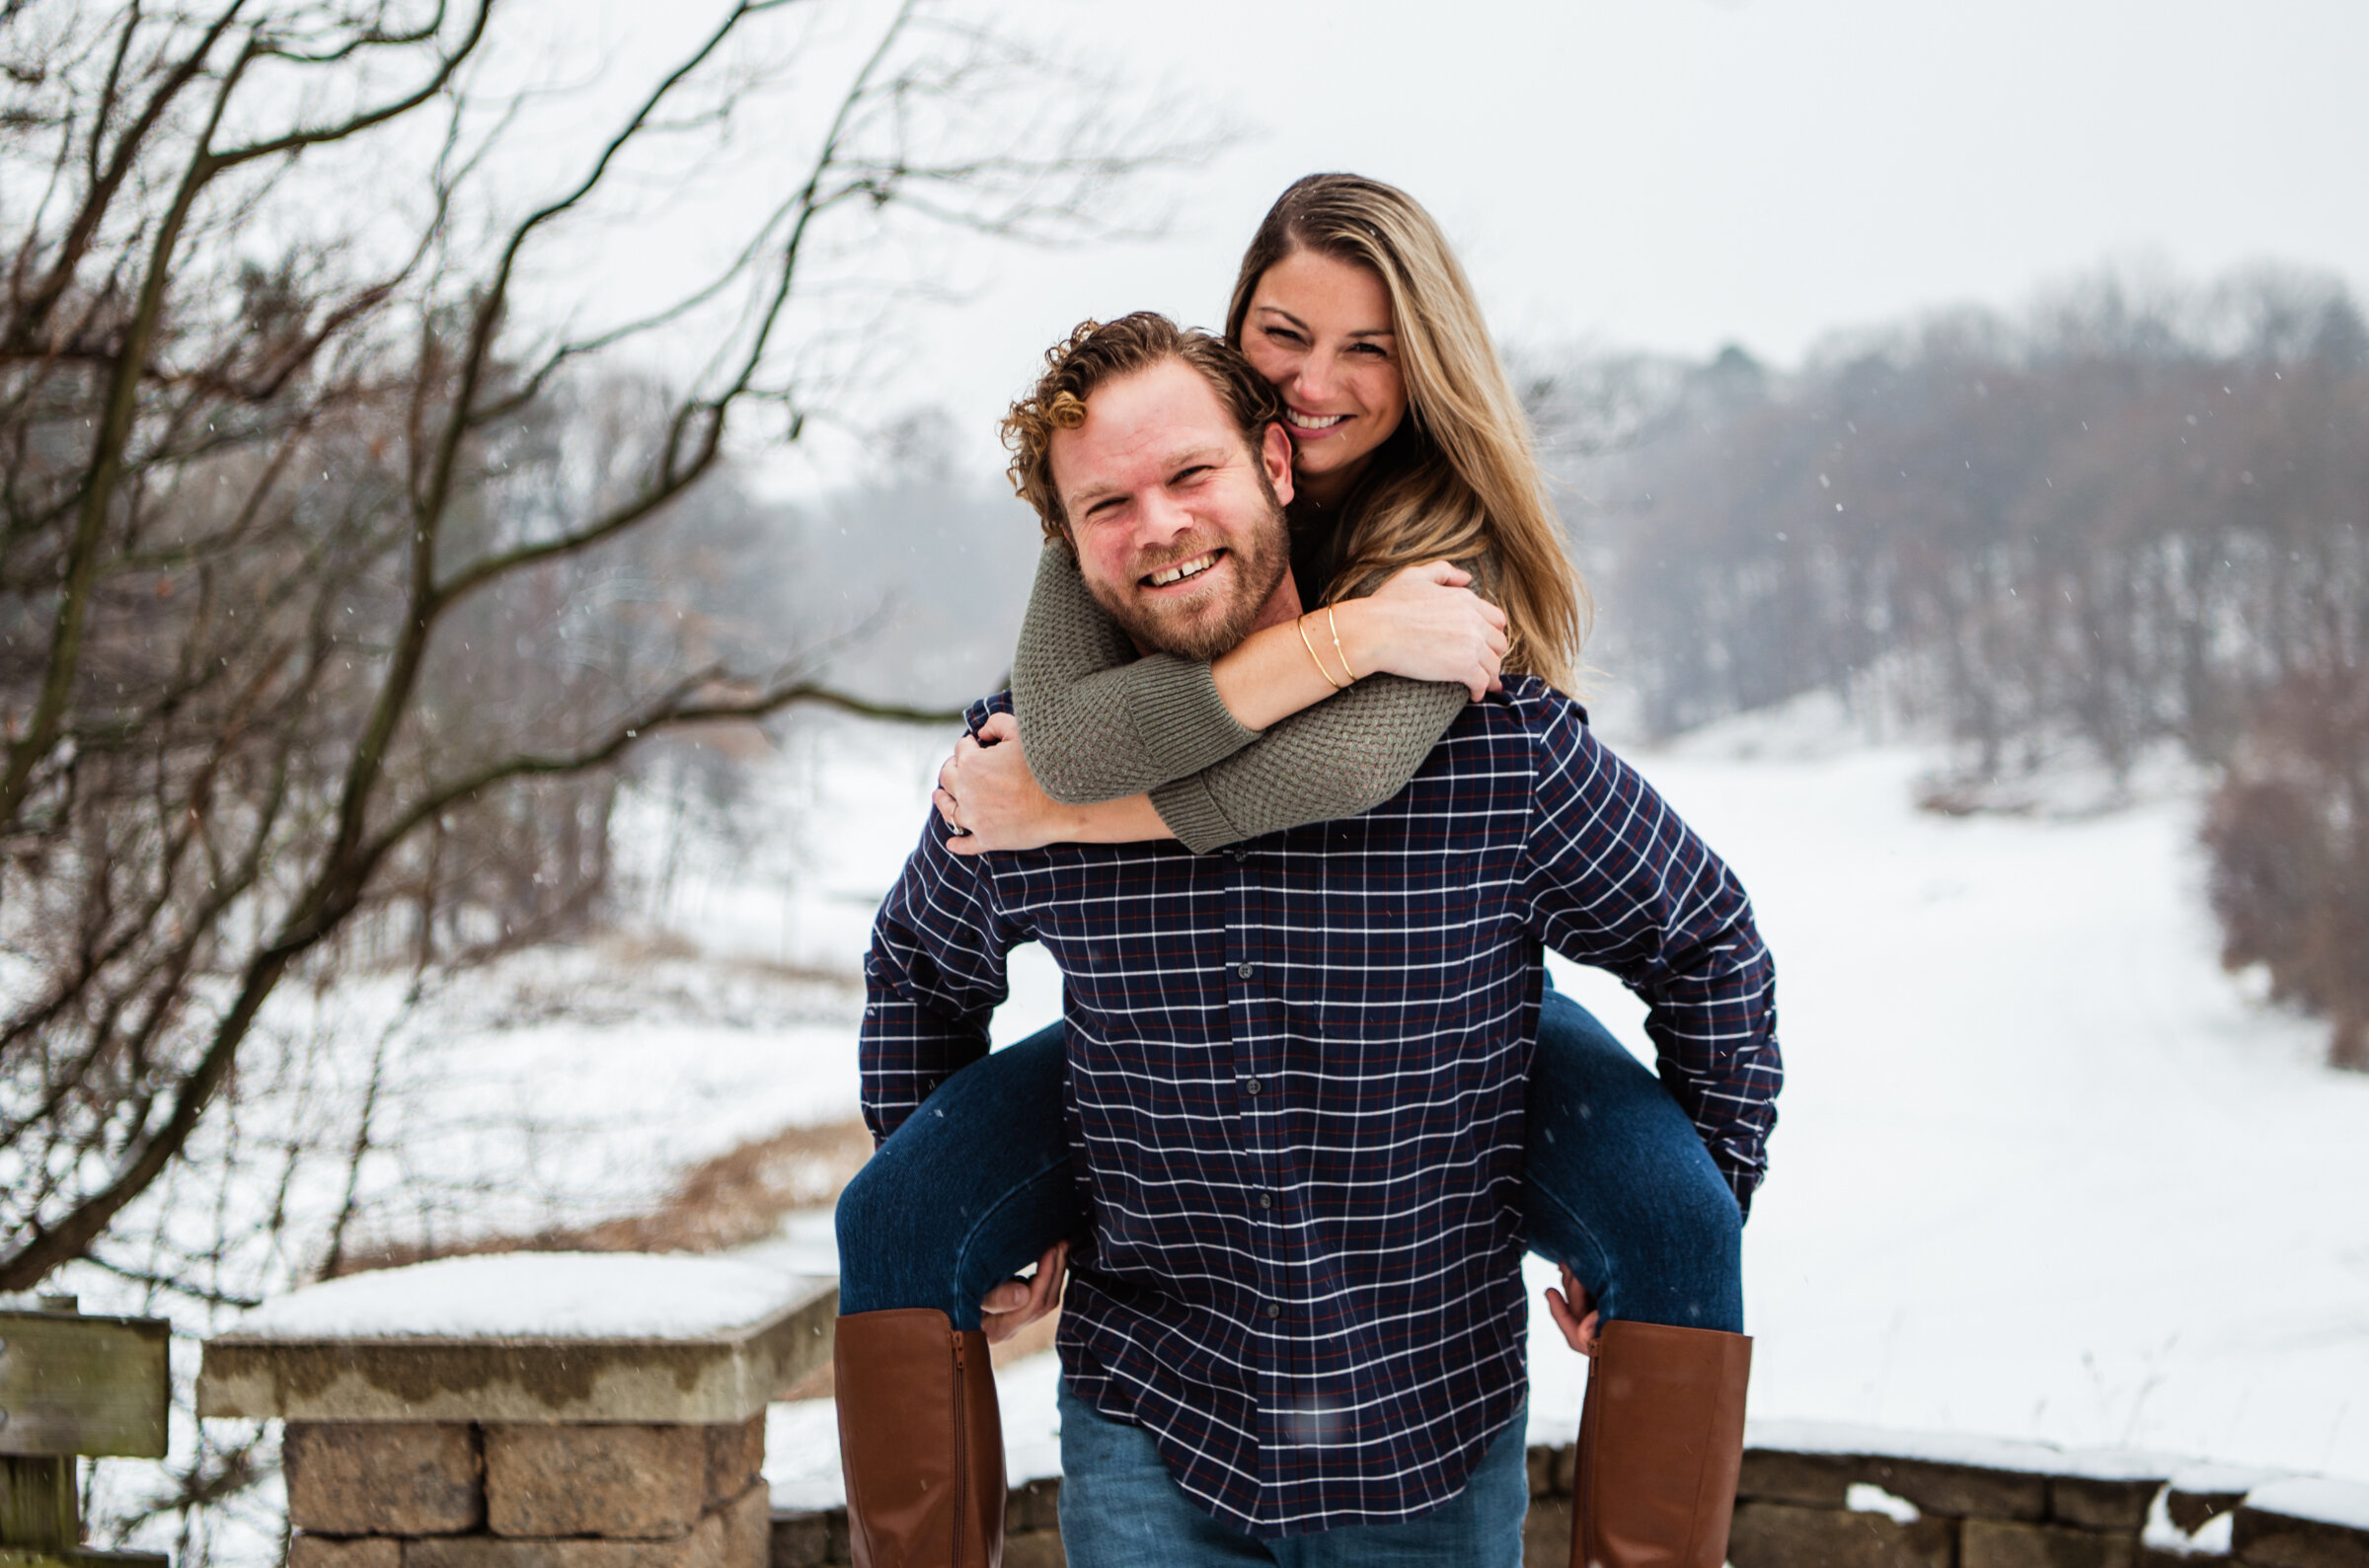 Irondequoit_Beer_Company_Durand_Eastman_Park_Rochester_Engagement_Session_JILL_STUDIO_Rochester_NY_Photographer_7120.jpg